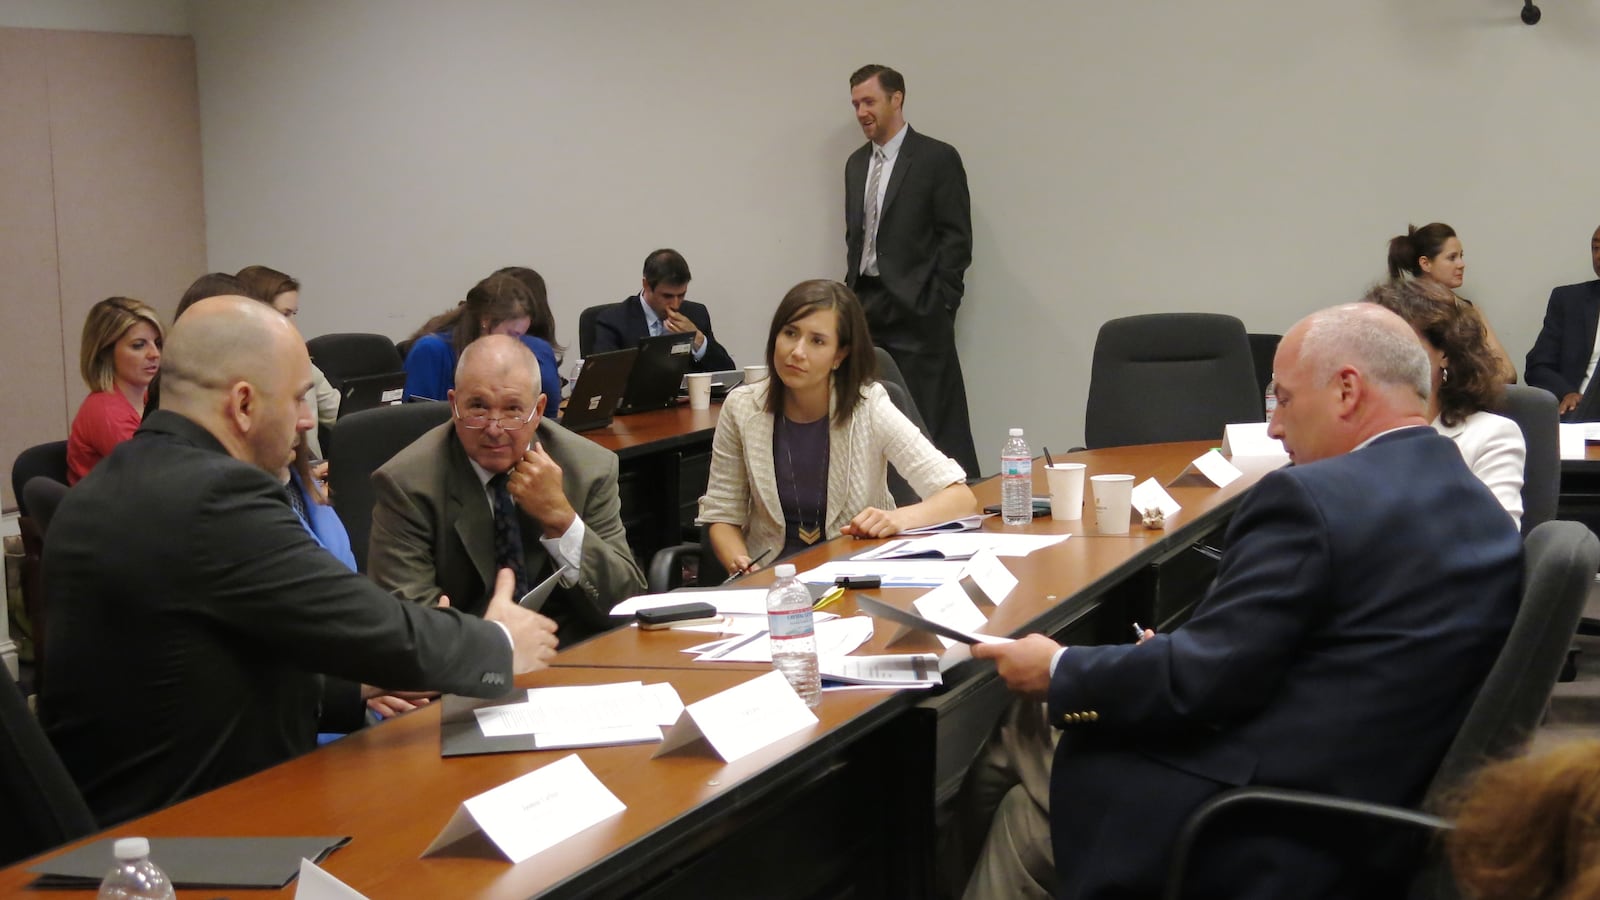 From left: Math teacher Phillip Eller, Rep. John Forgety, State Board of Education Director Sara Heyburn and Maryville City Schools Director Mike Winstead discuss state testing policies at a 2015 meeting of Tennessee's first testing task force.